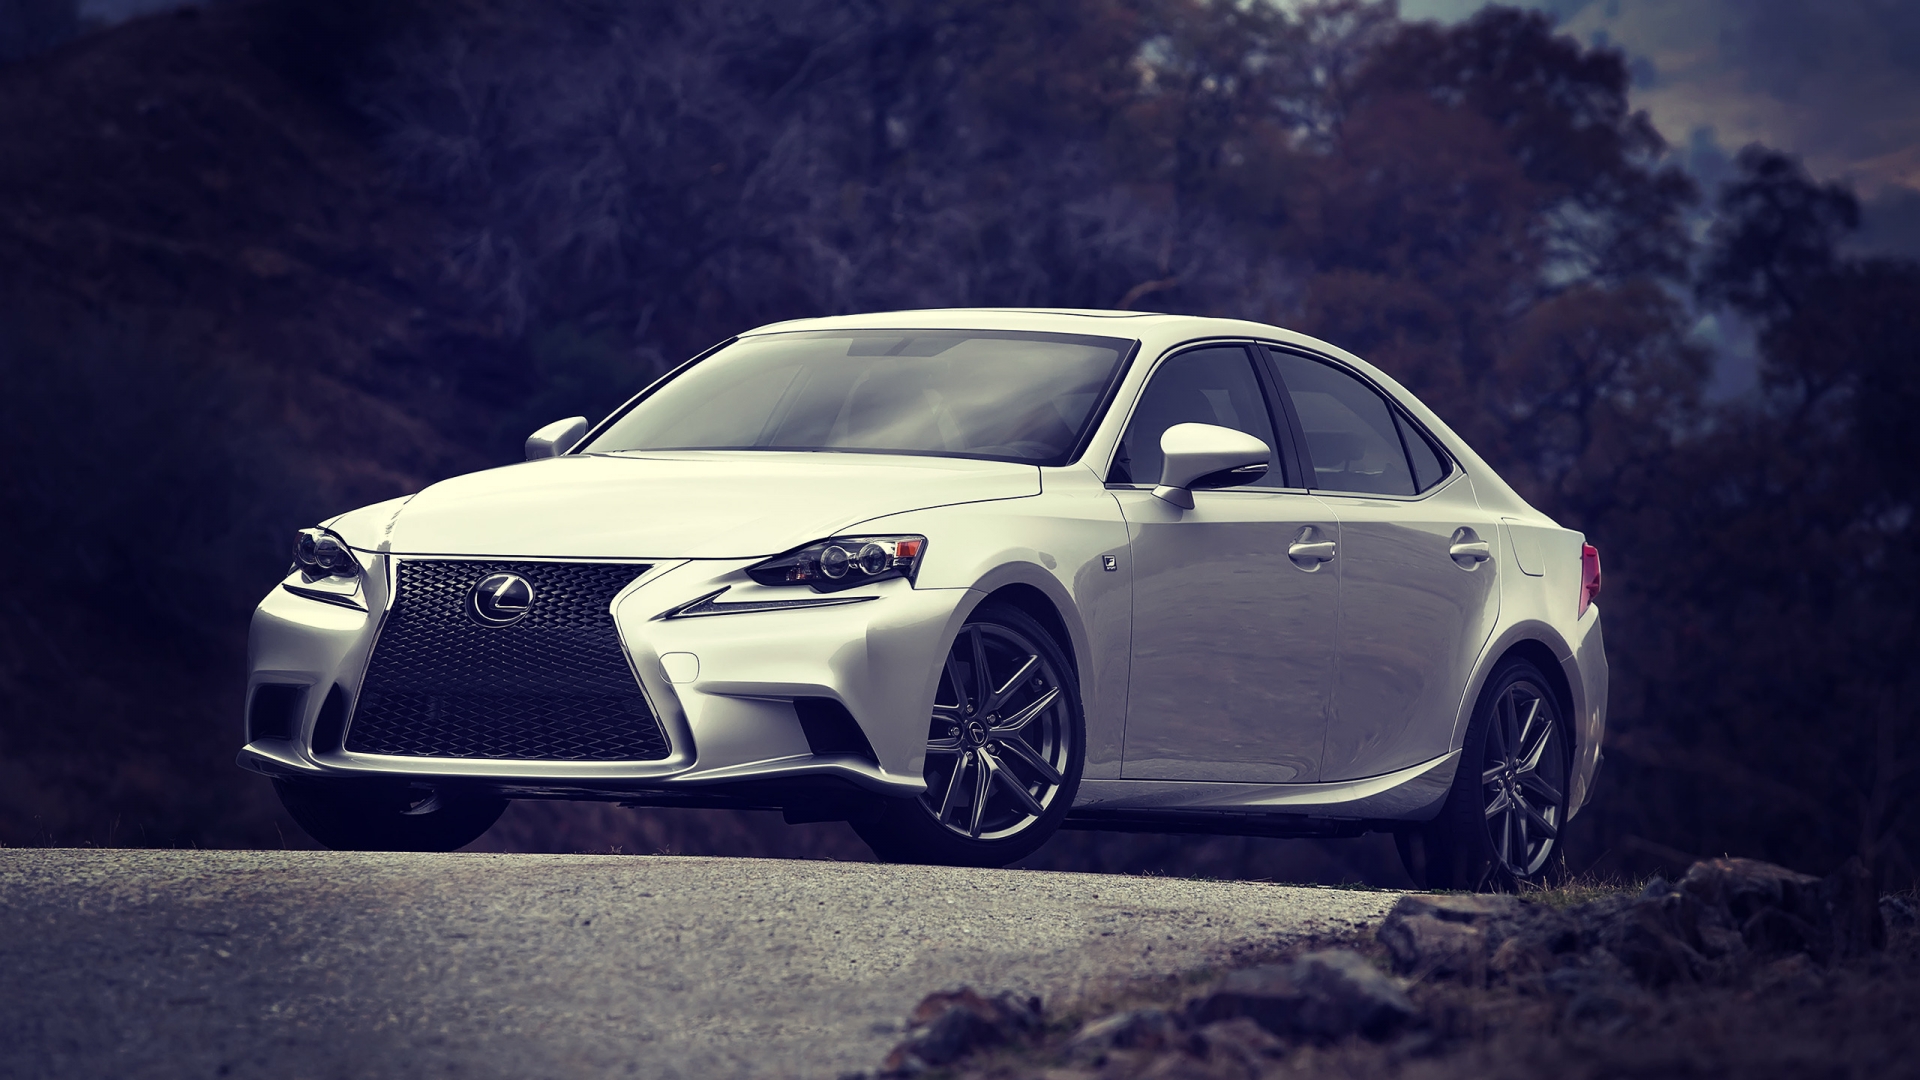 Lexus IS 2014 for 1920 x 1080 HDTV 1080p resolution